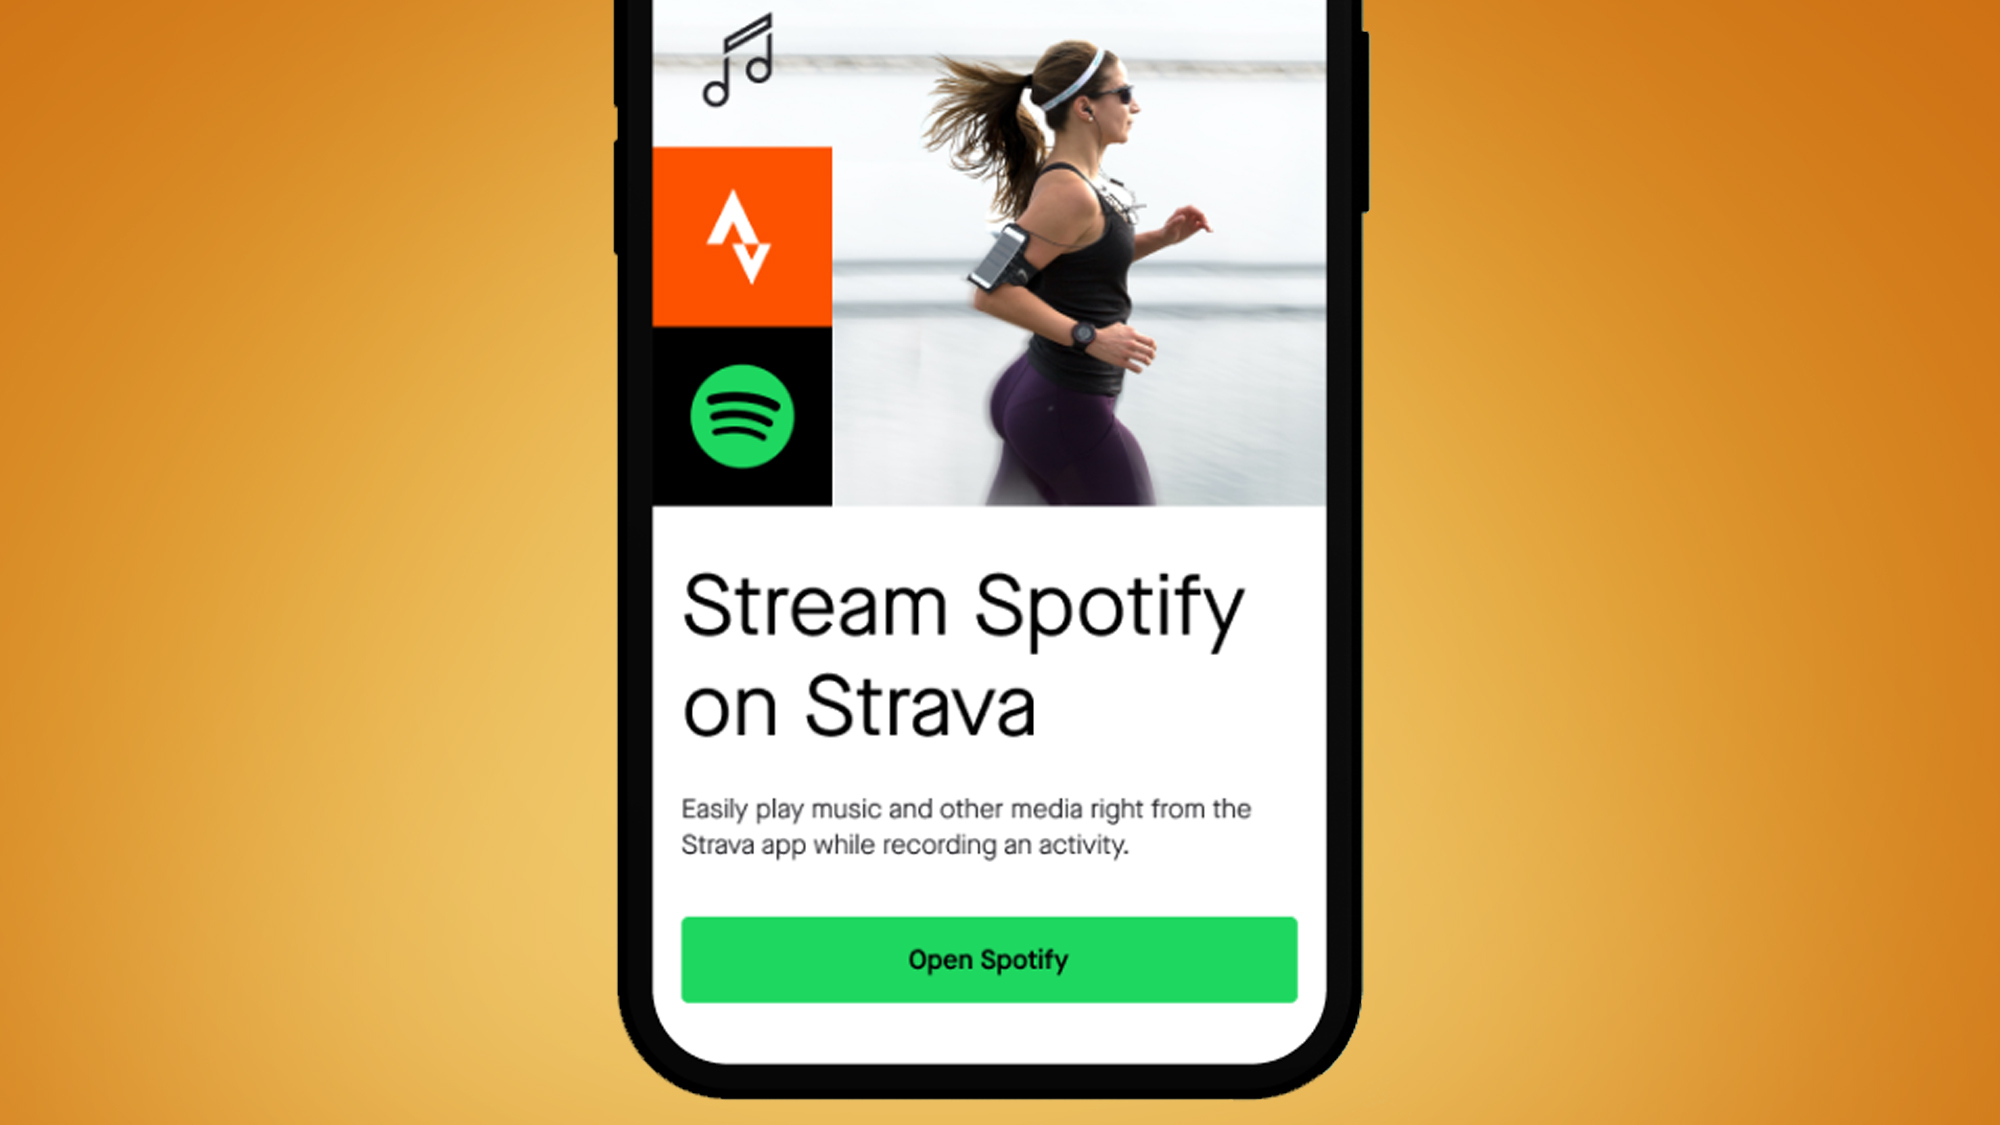 A phone screen on an orange background showing Strava and Spotify integration